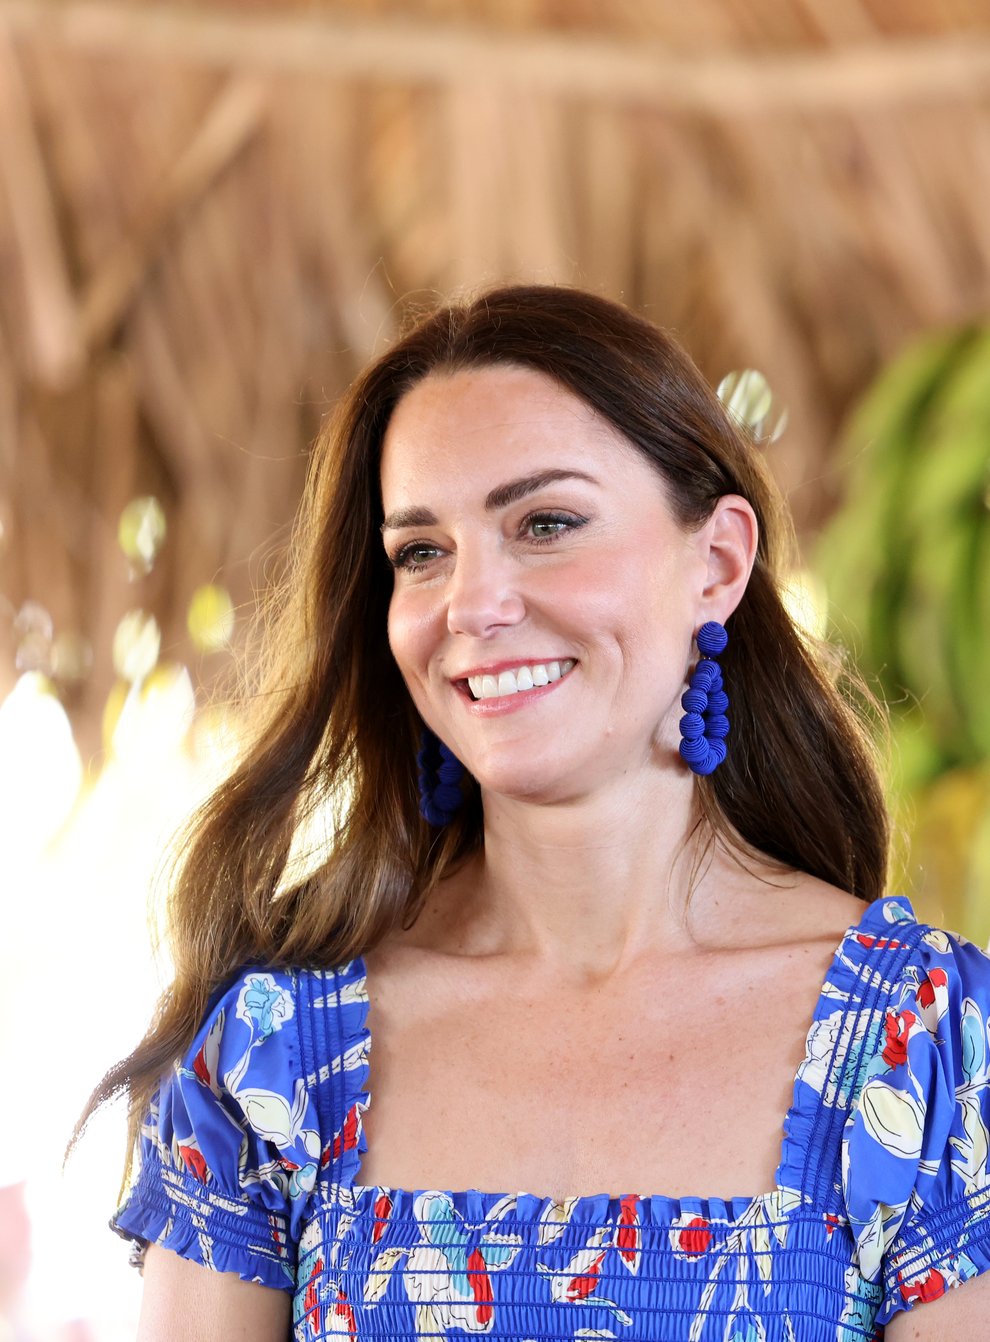 The Duke and Duchess of Cambridge attending the Festival of Garifuna Culture in Hopkins, a small village on the coast which is considered the cultural centre of the Garifuna community in Belize, during their tour of the Caribbean on behalf of the Queen to mark her Platinum Jubilee. Picture date: Sunday March 20, 2022.